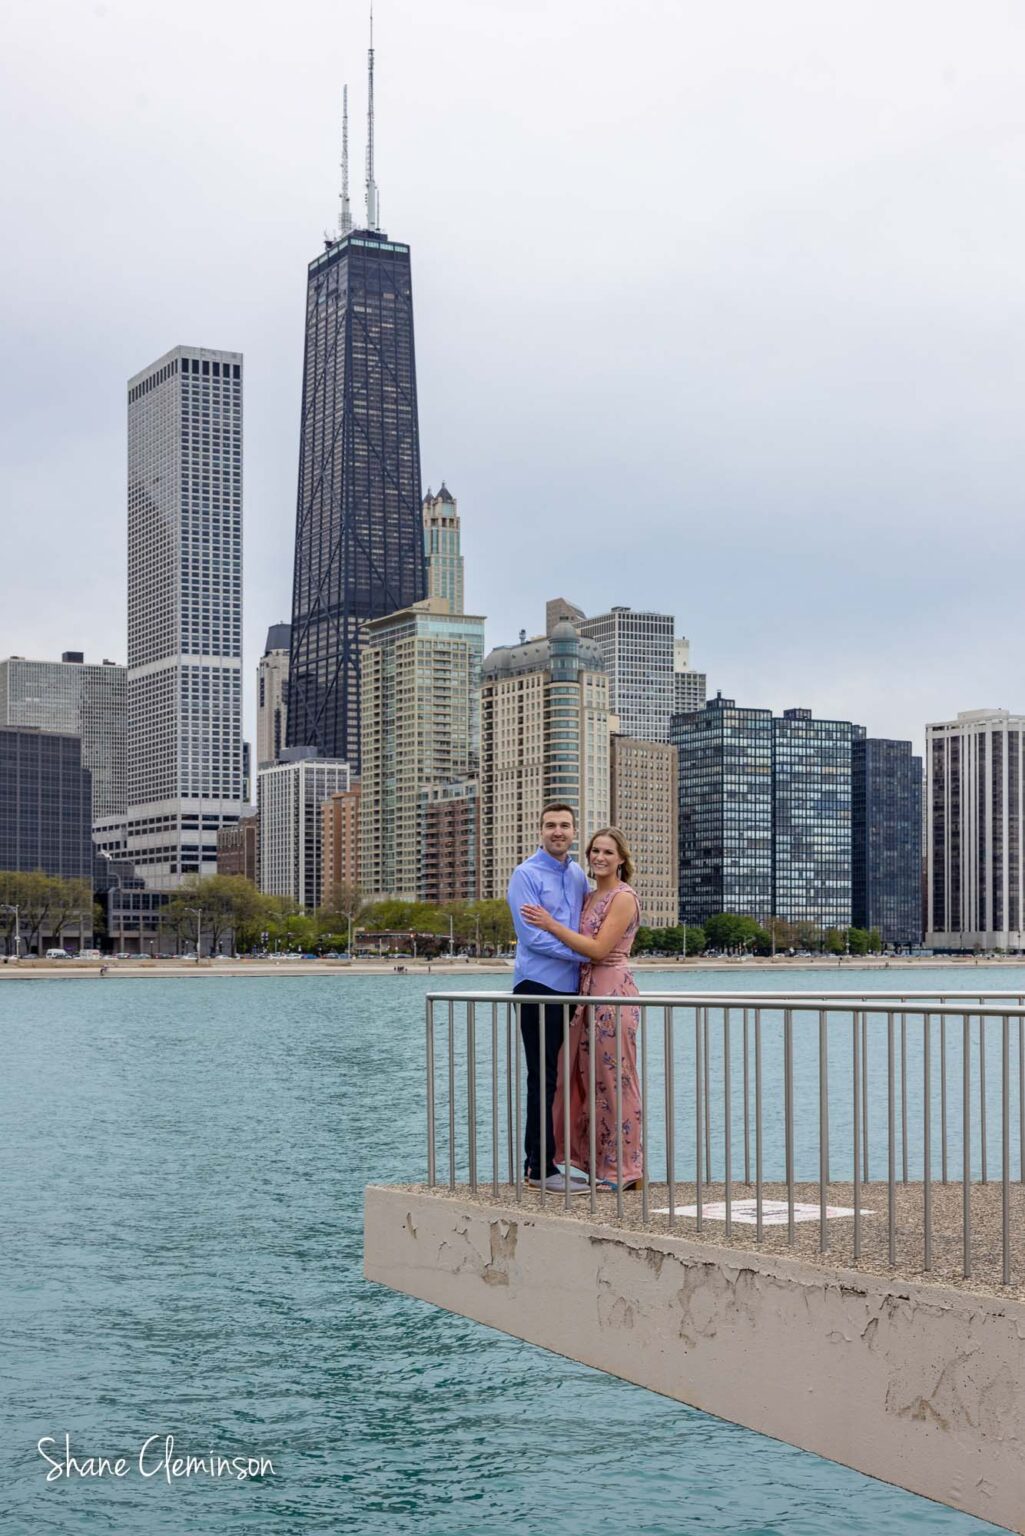 Milton Lee Olive Park waterfront Engagement - Shane Cleminson Photography -  Hyde Park Chicago Wedding Photographer. Family and event Photography